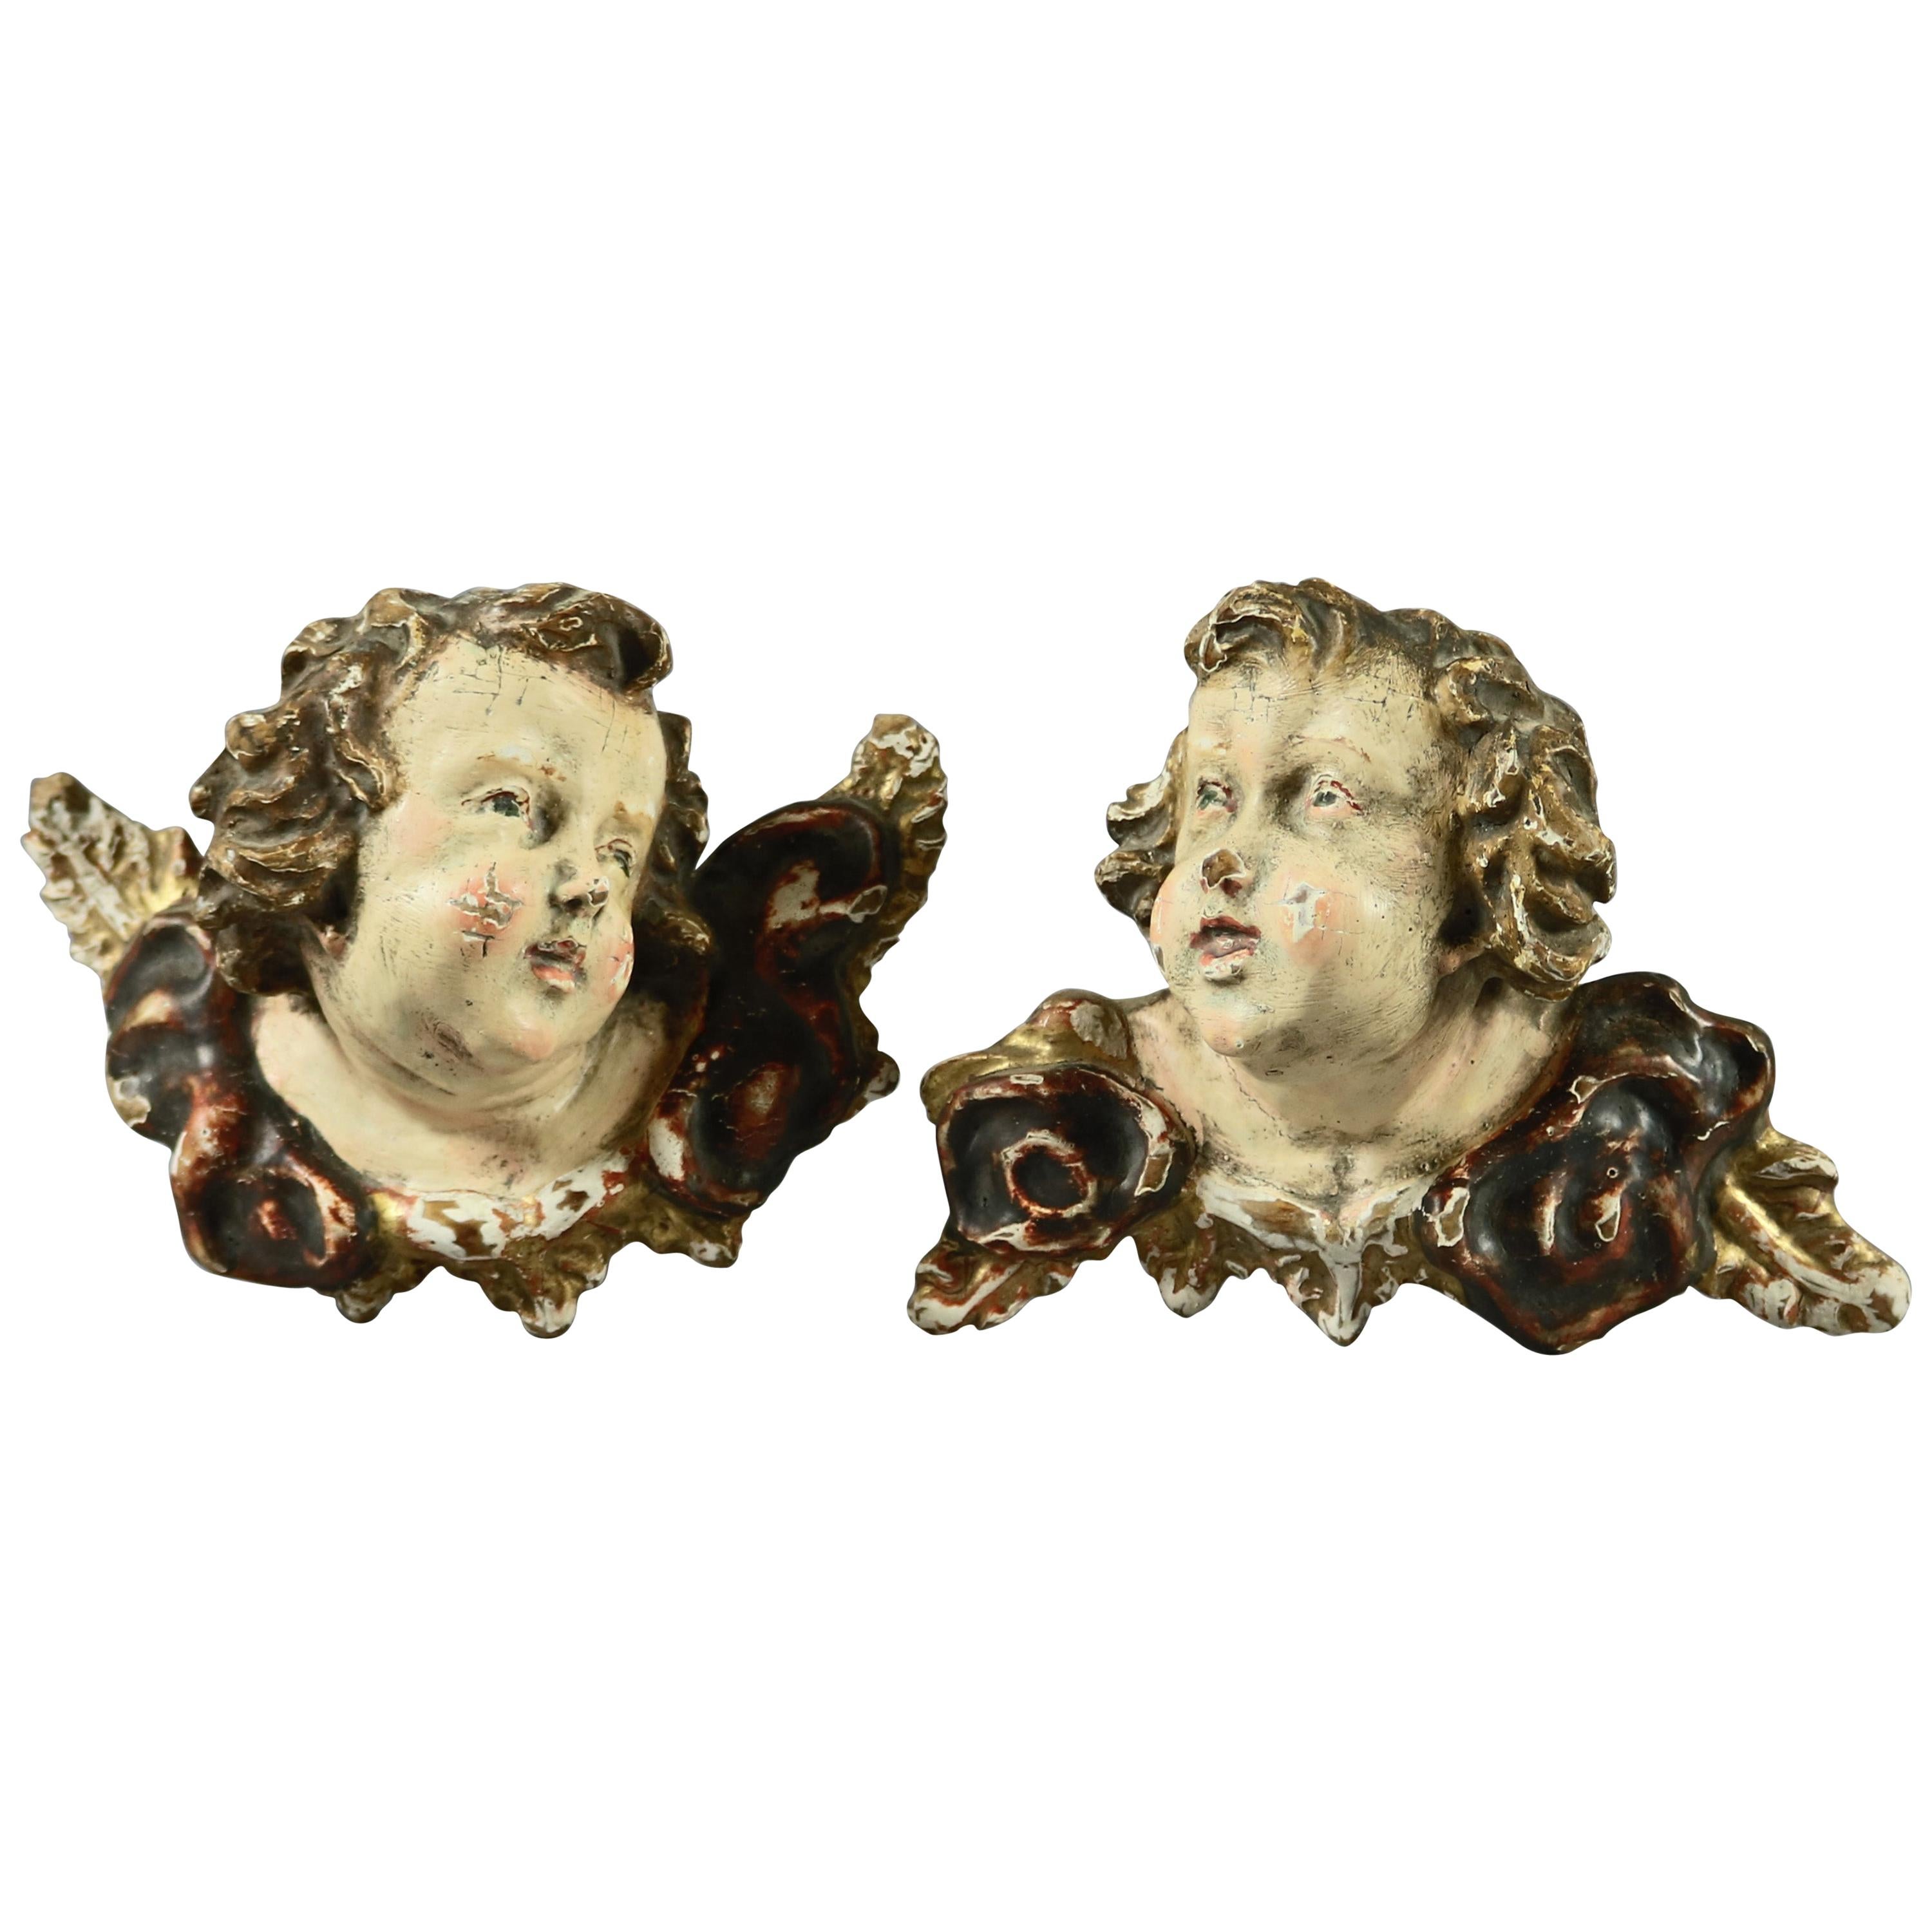 French Polychrome Carved Wood Figural Cherub Wall Sculptures 19th Century, Pair